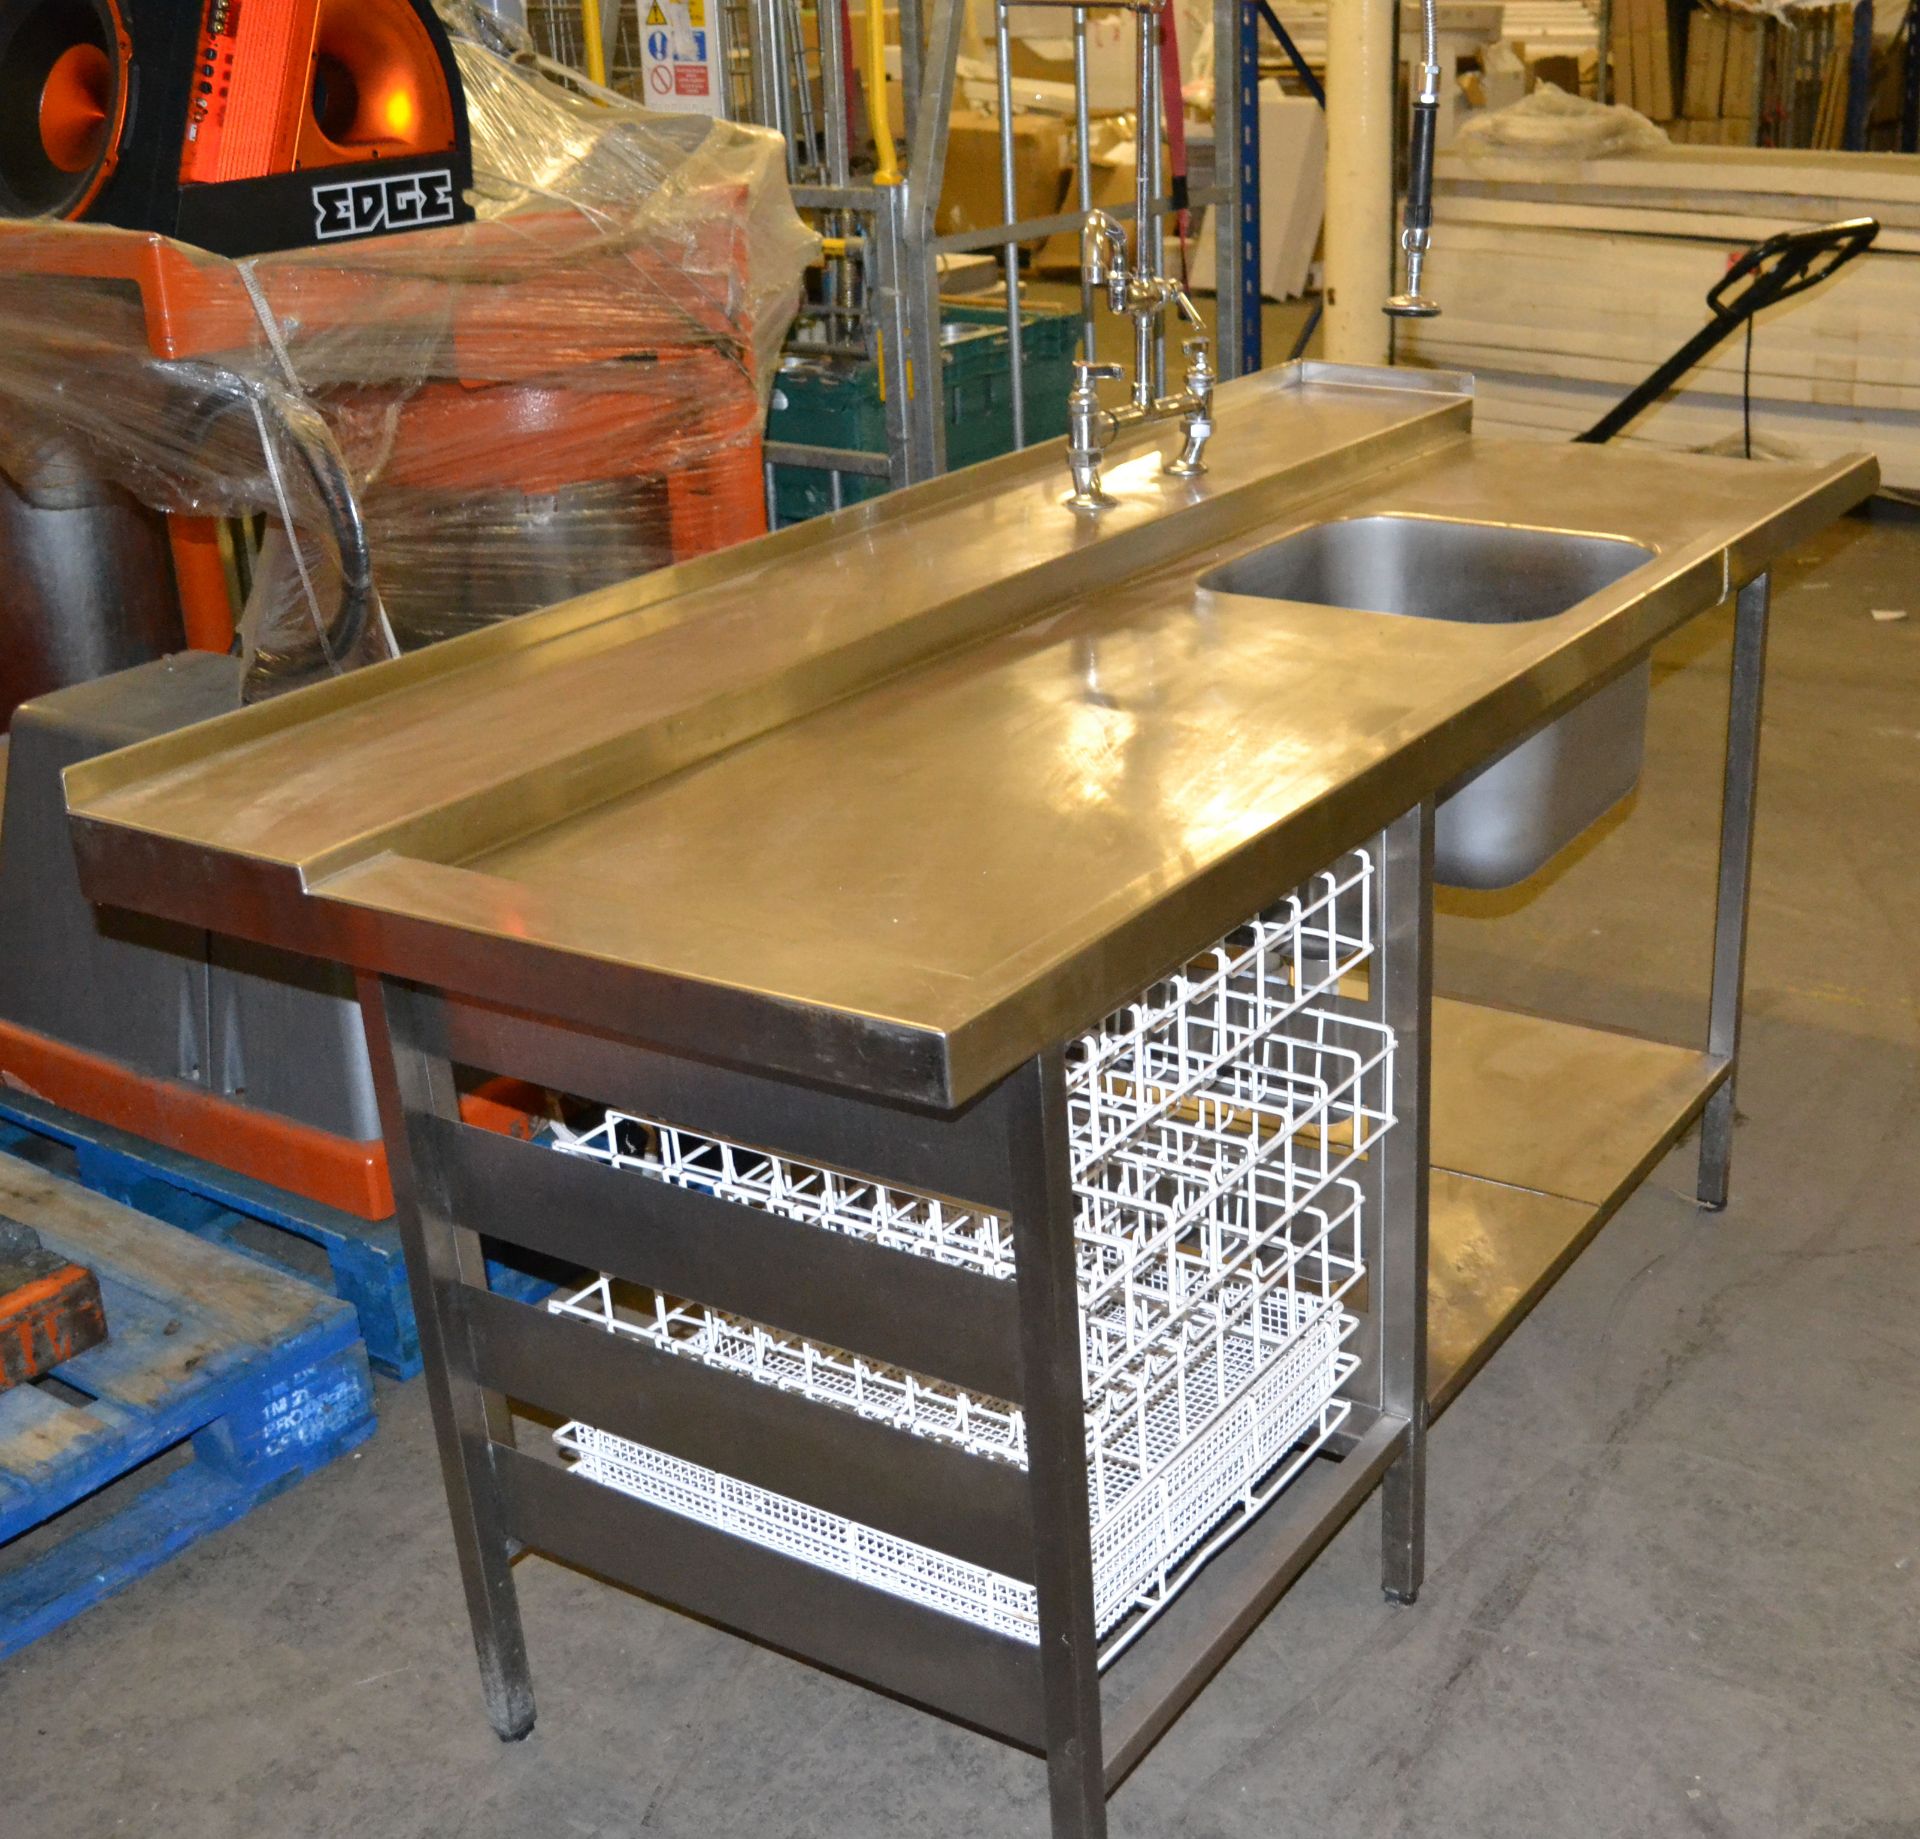 1 x Large Single Sink Unit - Large Draining Board, Draining Rack and Tap/Spray Combo - Approx. - Image 2 of 8